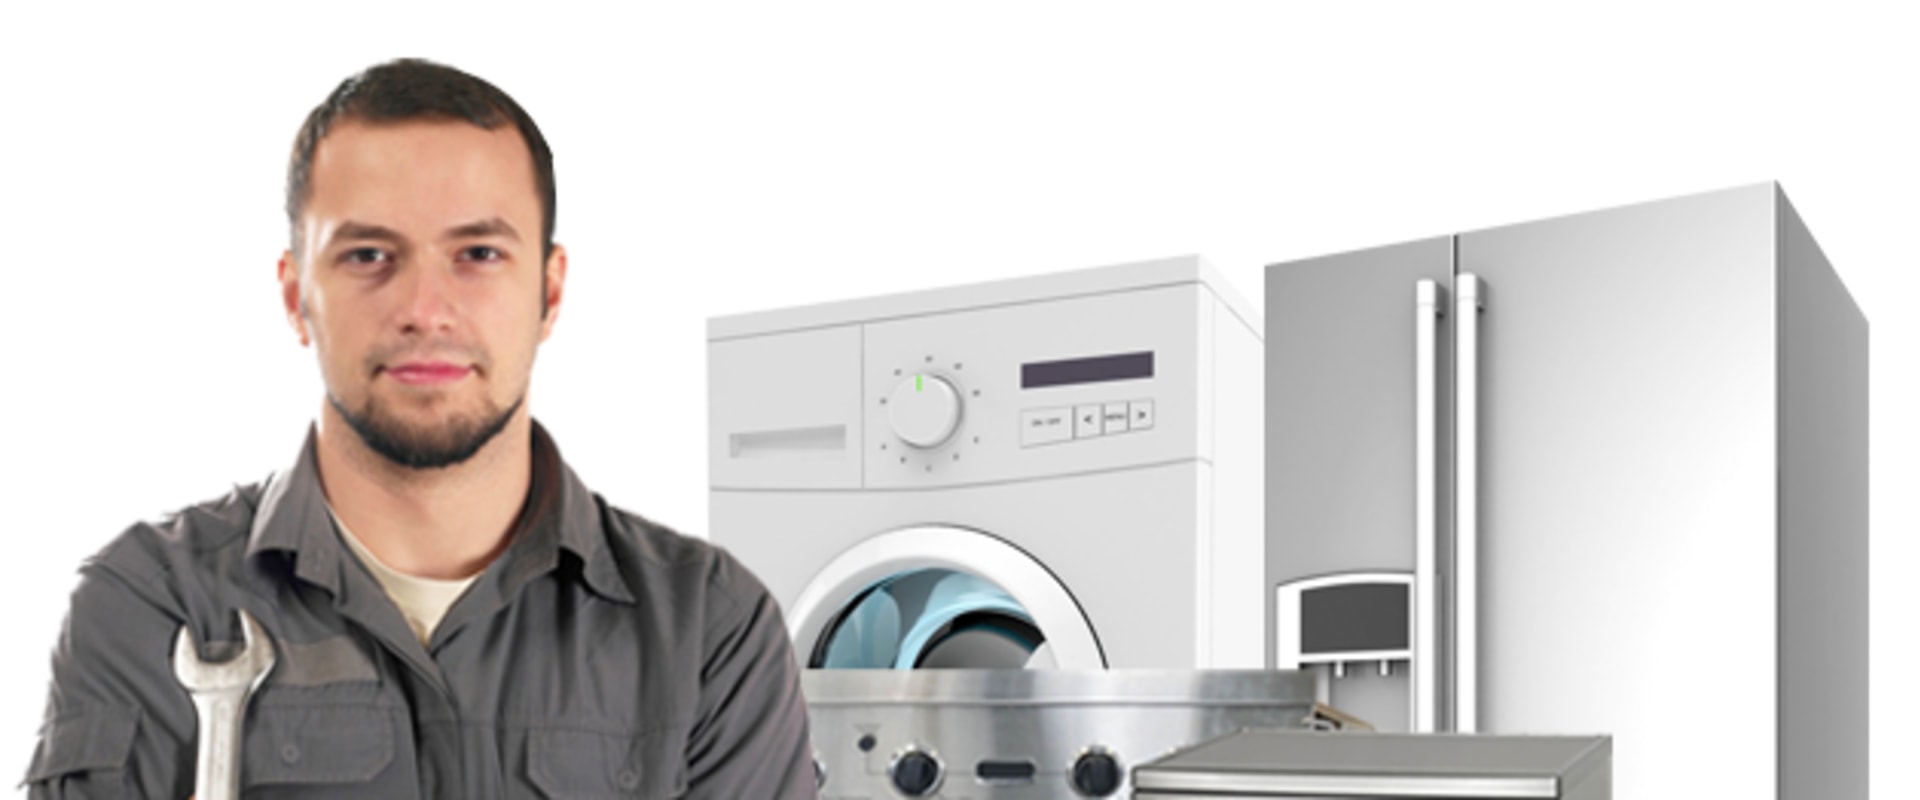 Who Can Help You Repair Your Appliances Near You?